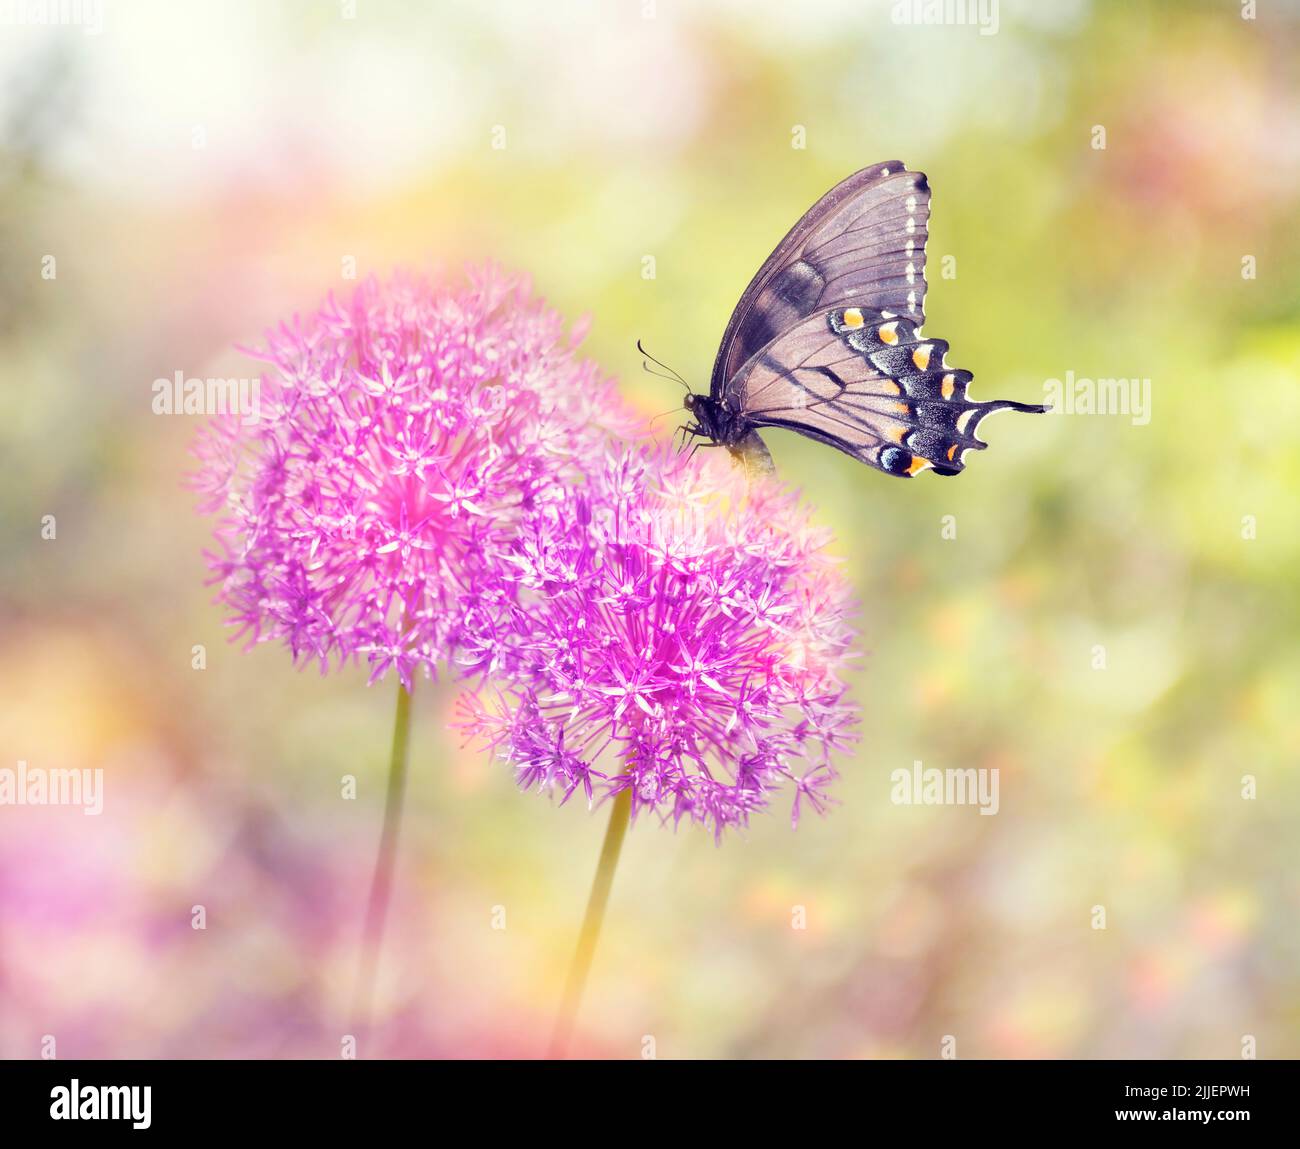 Beautiful Butterfly Feeds on Chive Flower Stock Photo